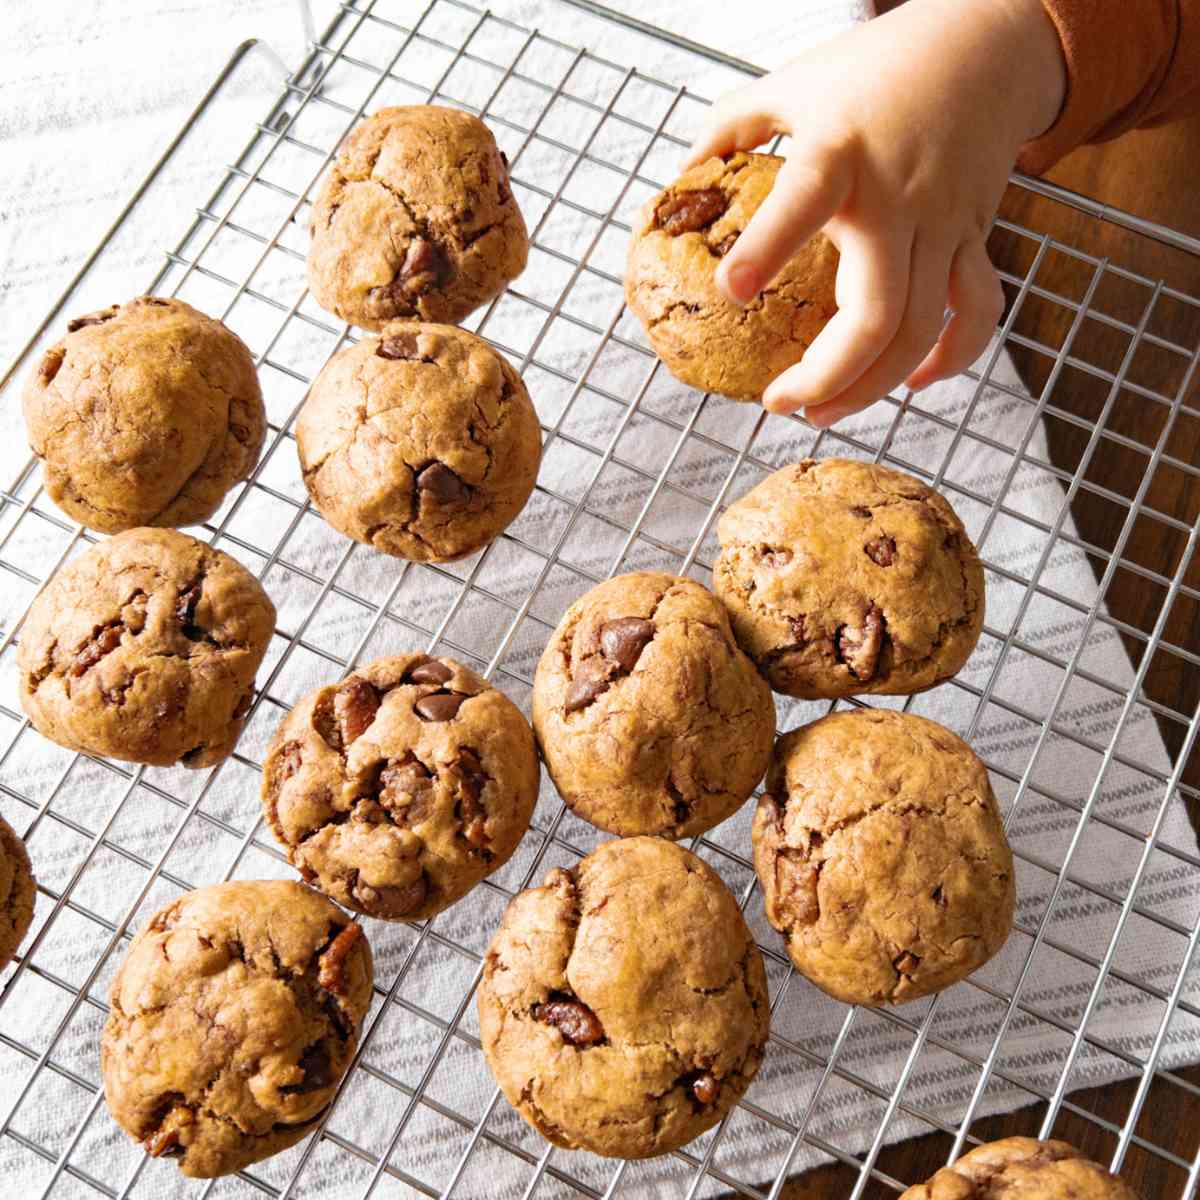 freshly baked einkorn chocolate chip cookies on a cooling rack